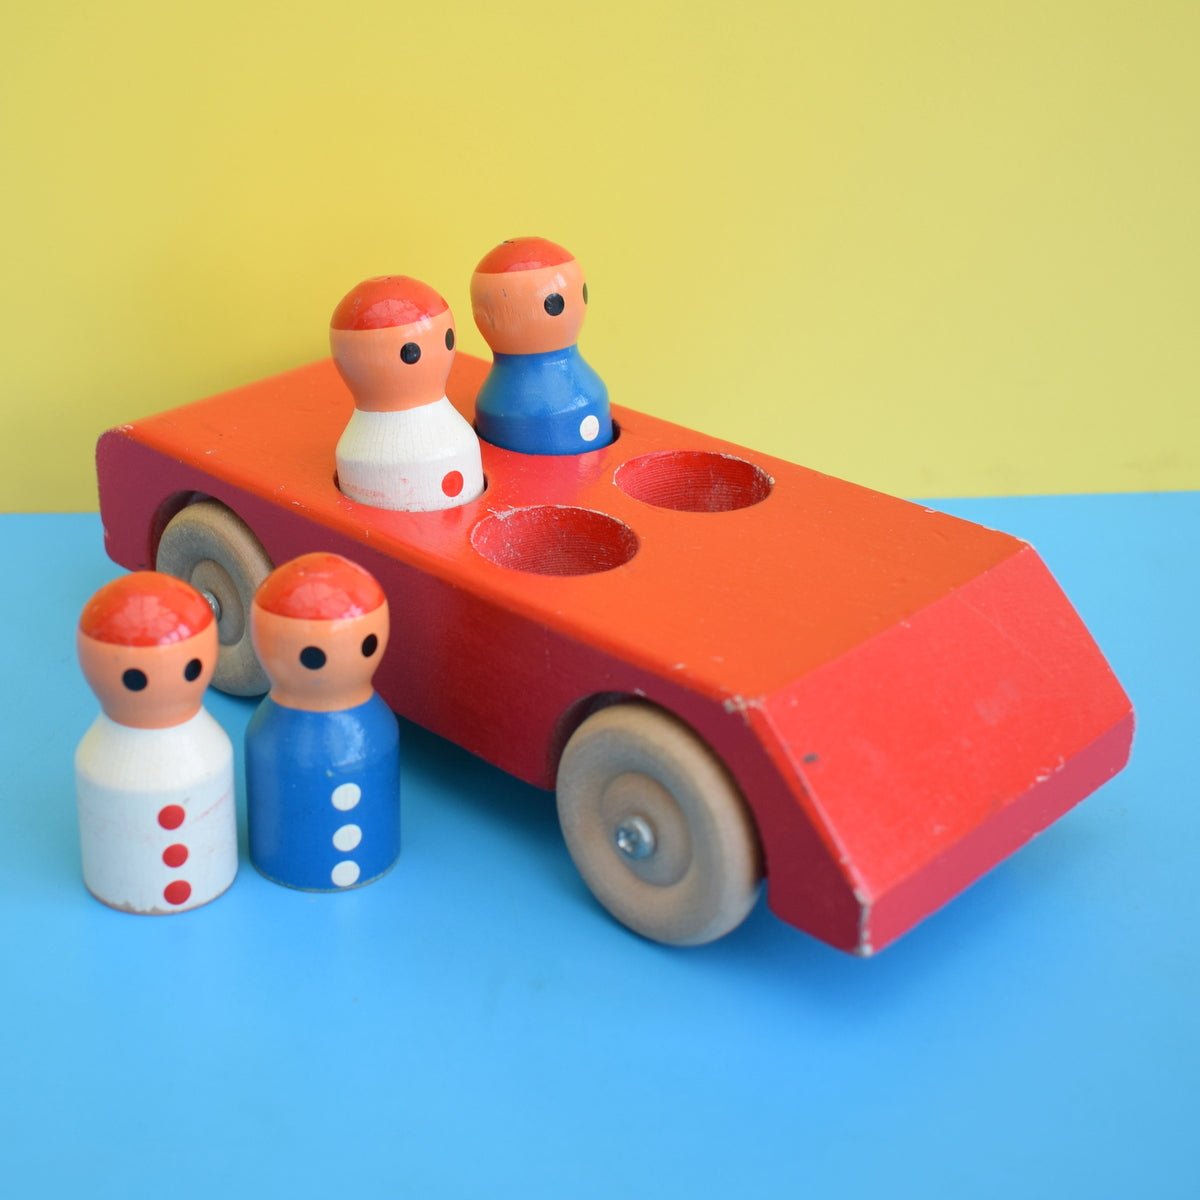 Vintage 1970s Wooden Car Toy With People - Escor Style - Red